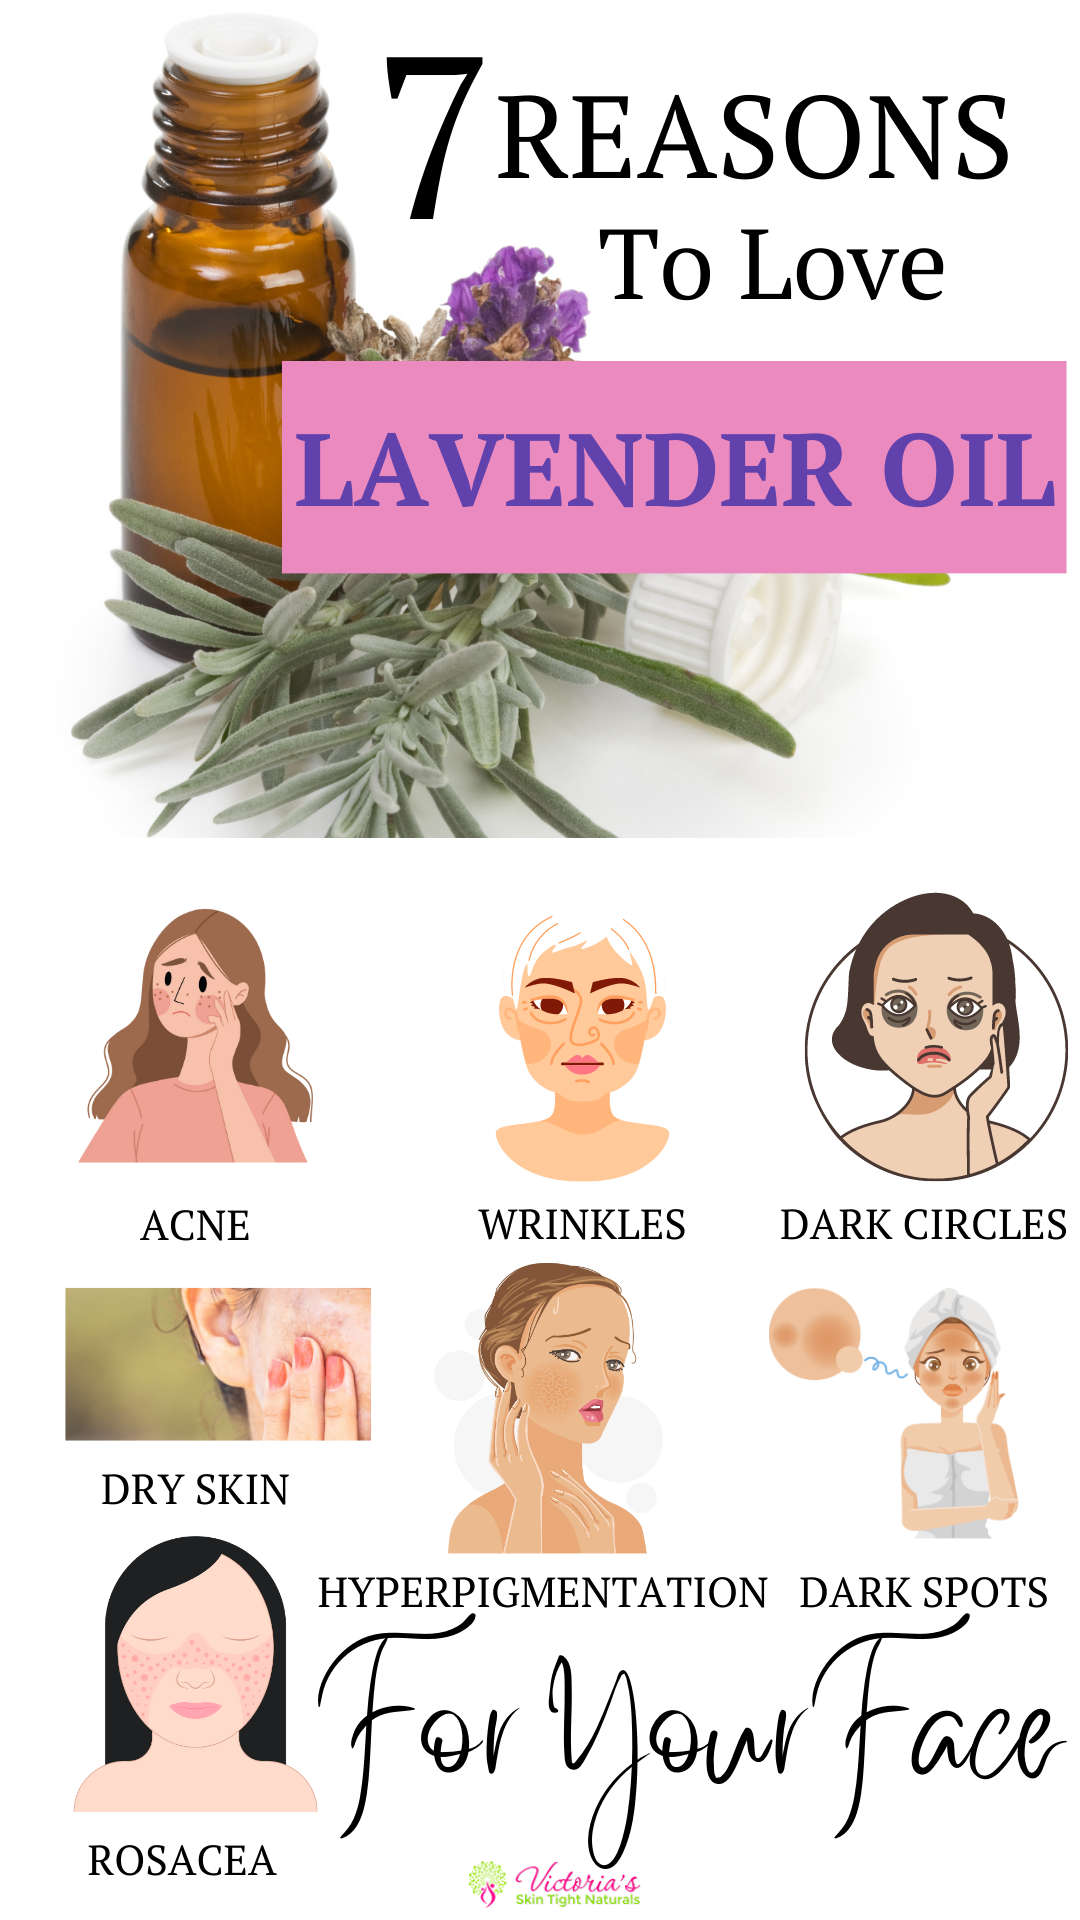 7 Reasons To Love Lavender Oil